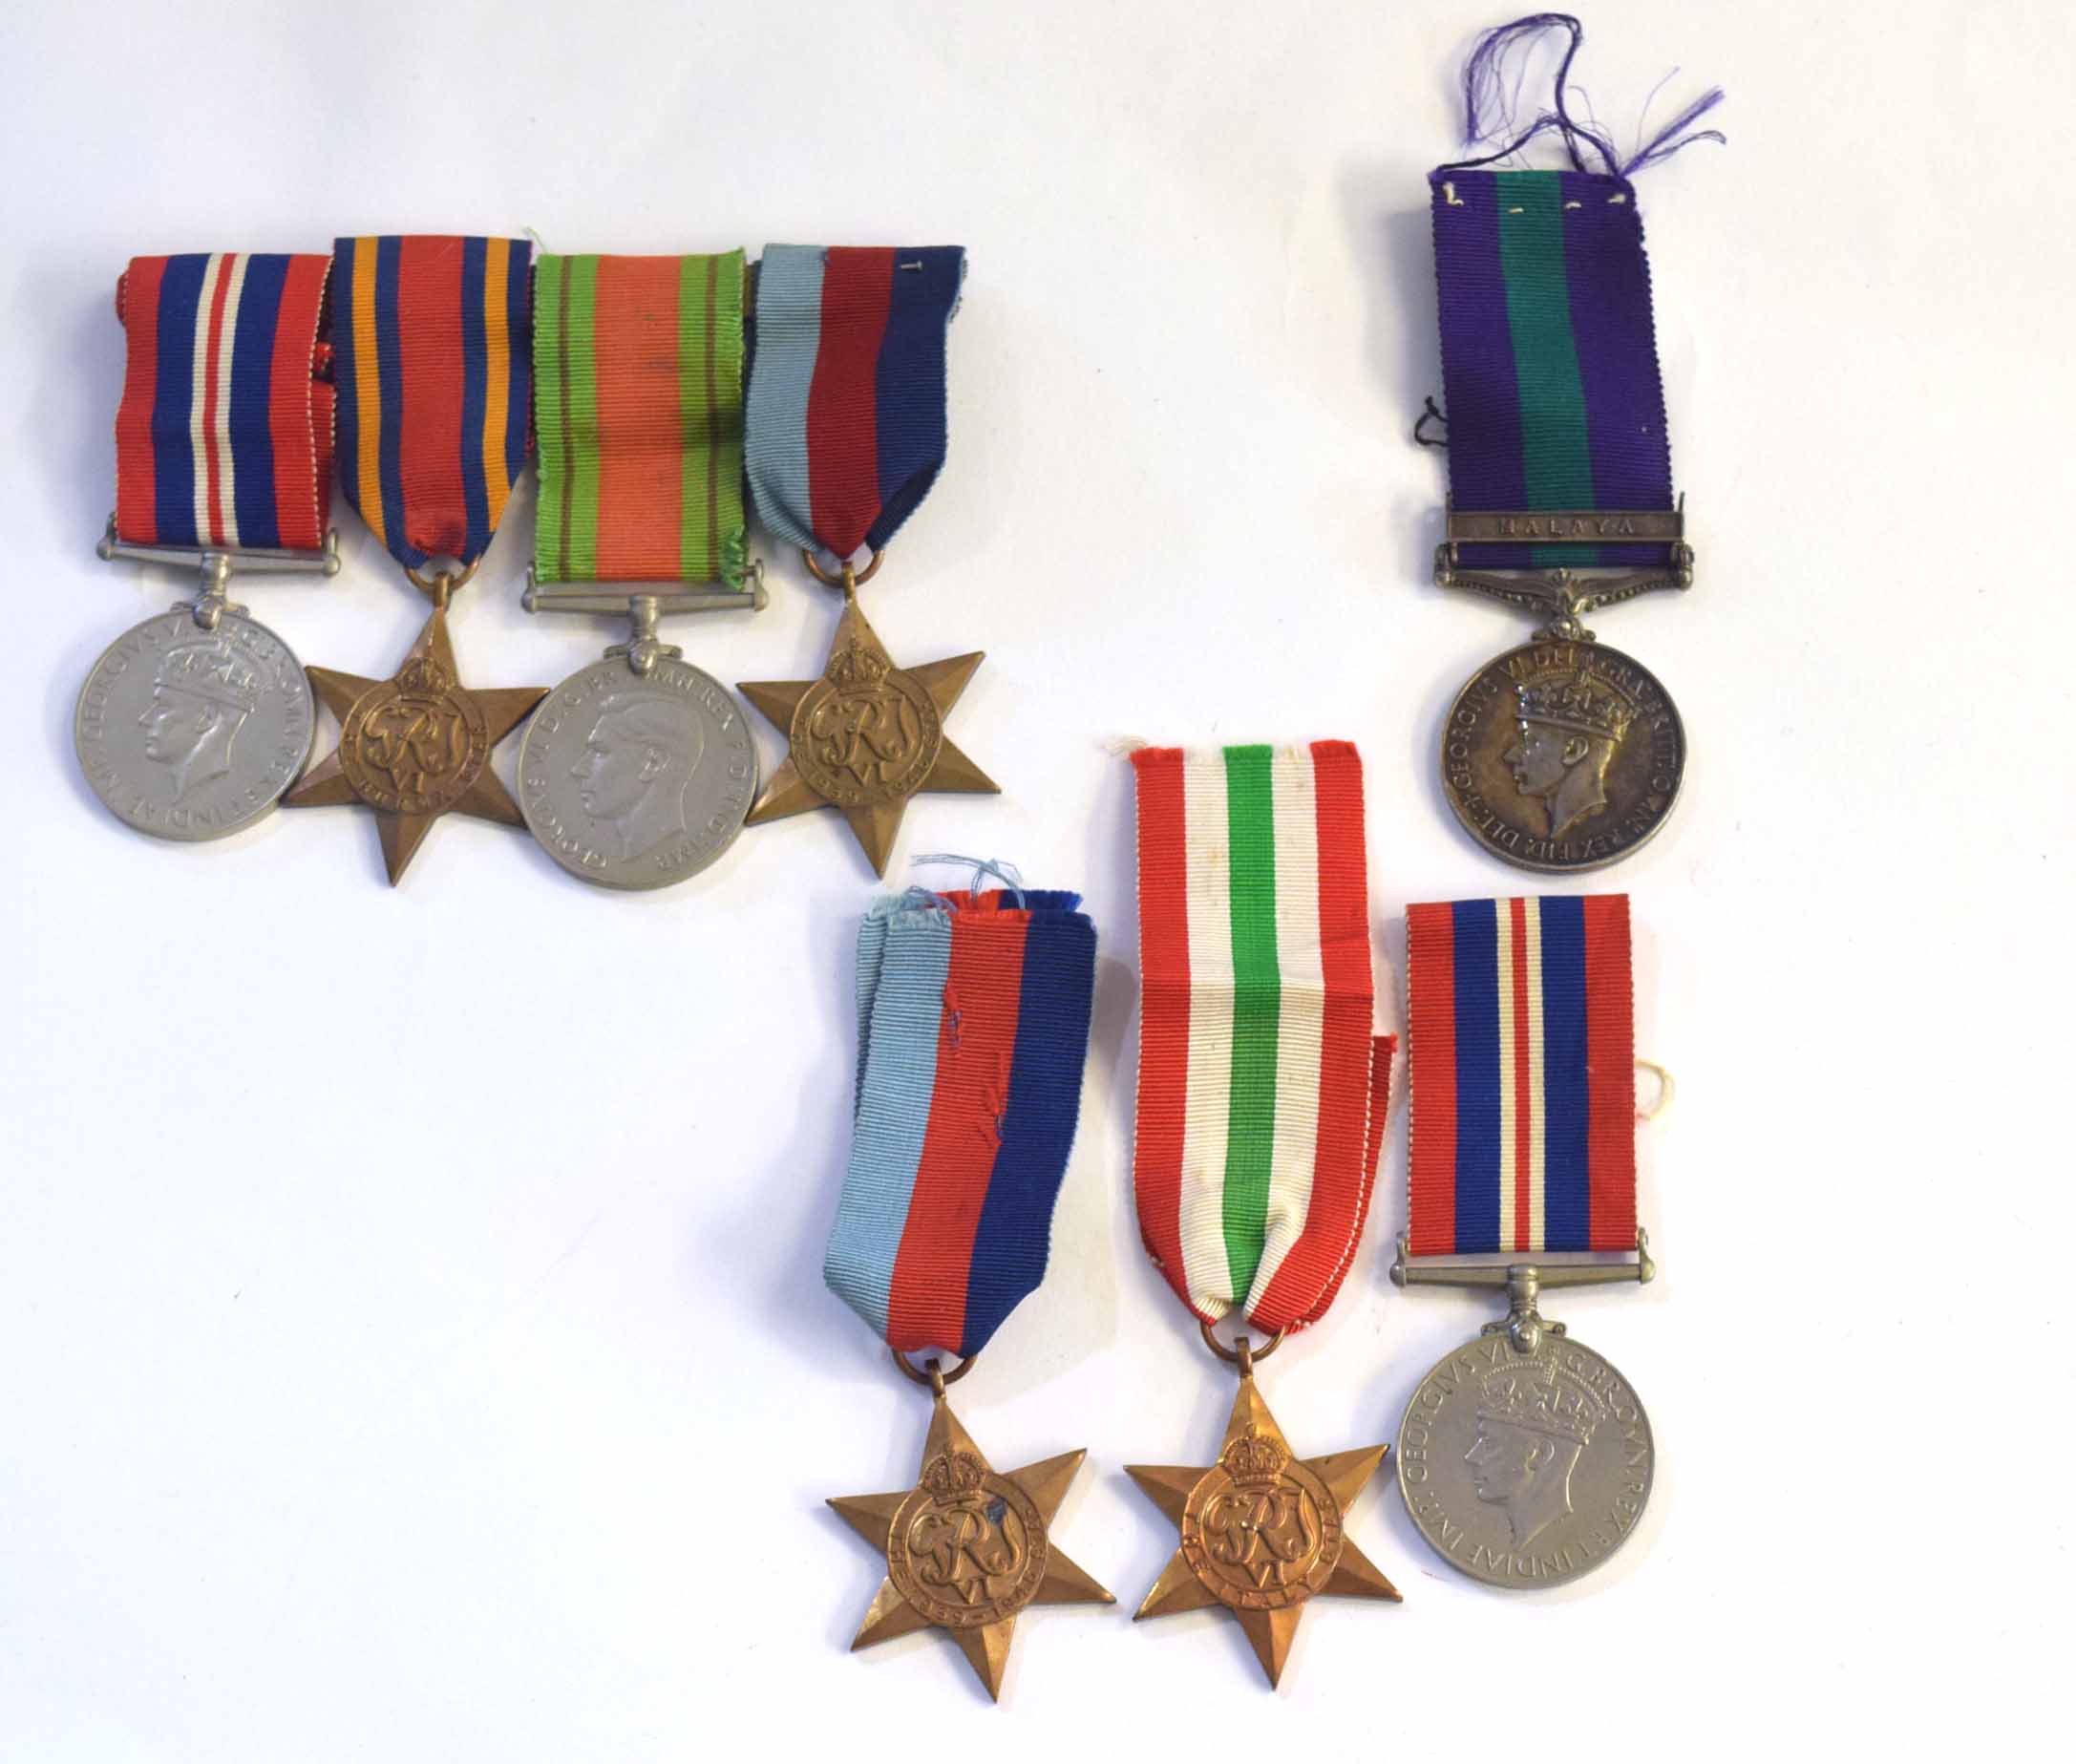 Quantity of WWII campaign medals to include 1939-45 Medal, Burma Star, Defence Medal and 1939-45